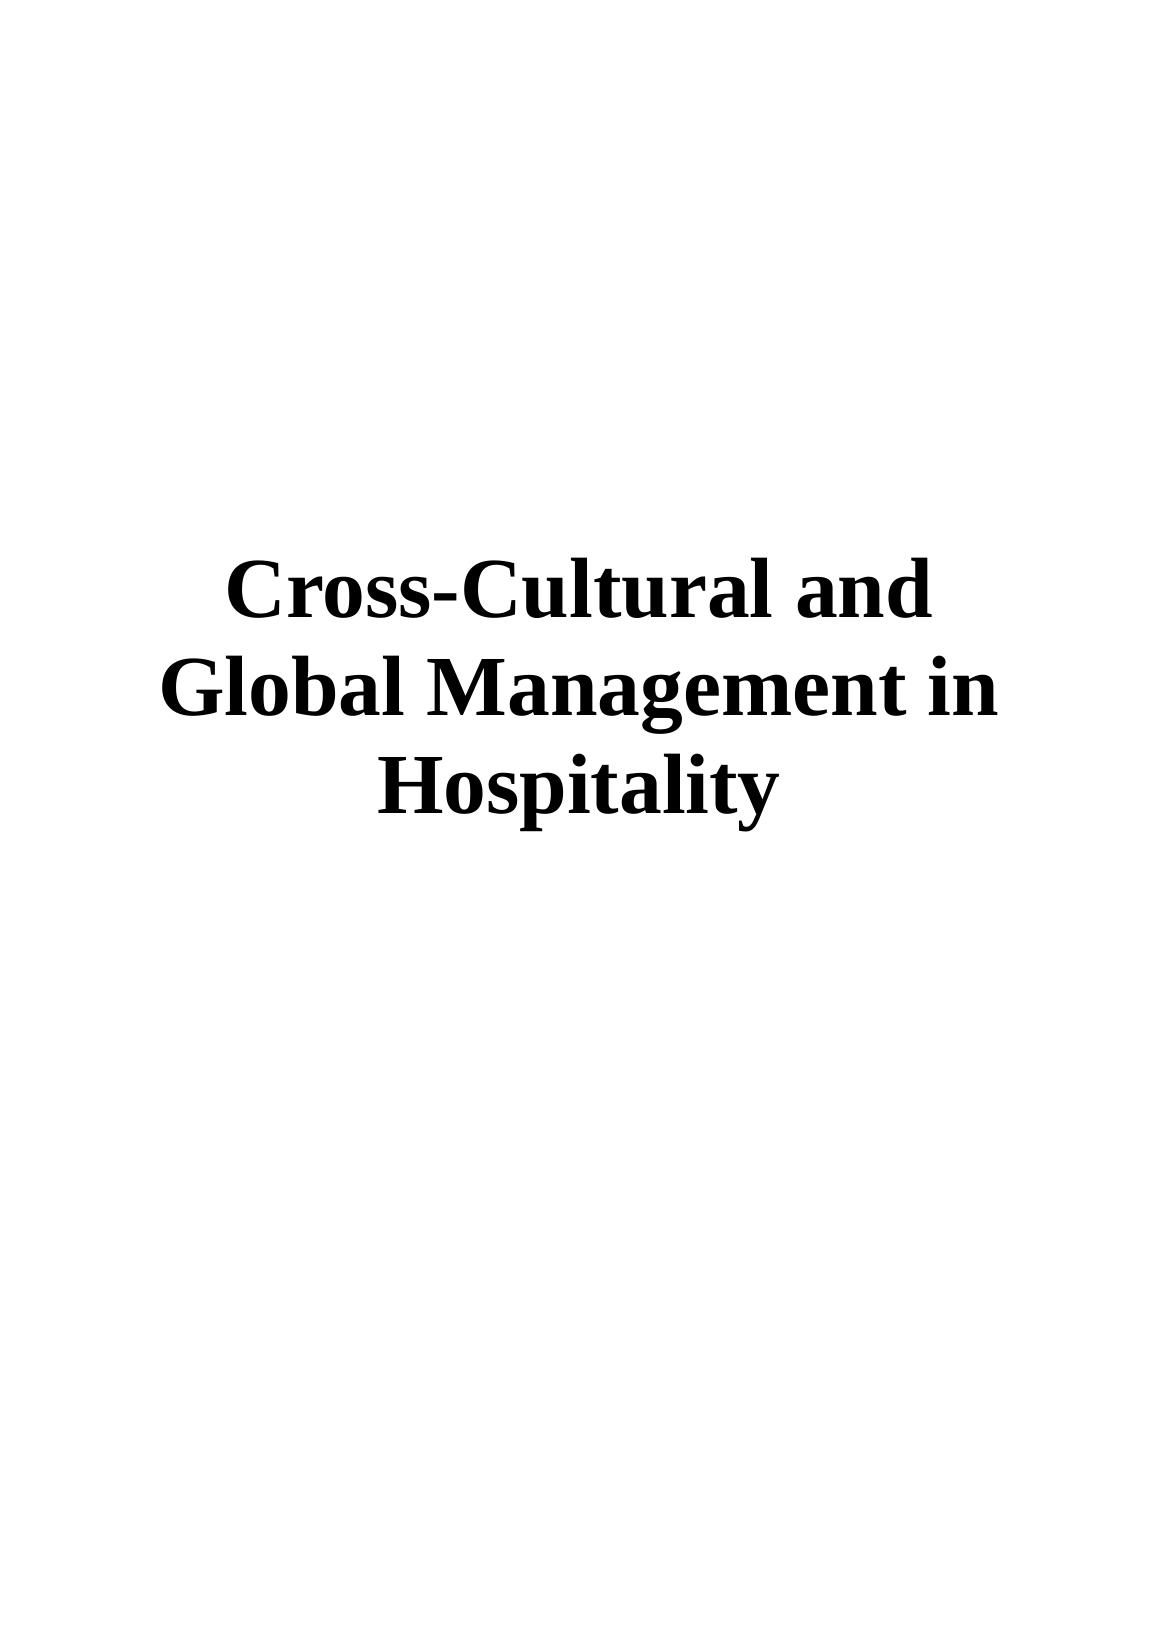 Cross Cultural & Global Management in Hospitality_1